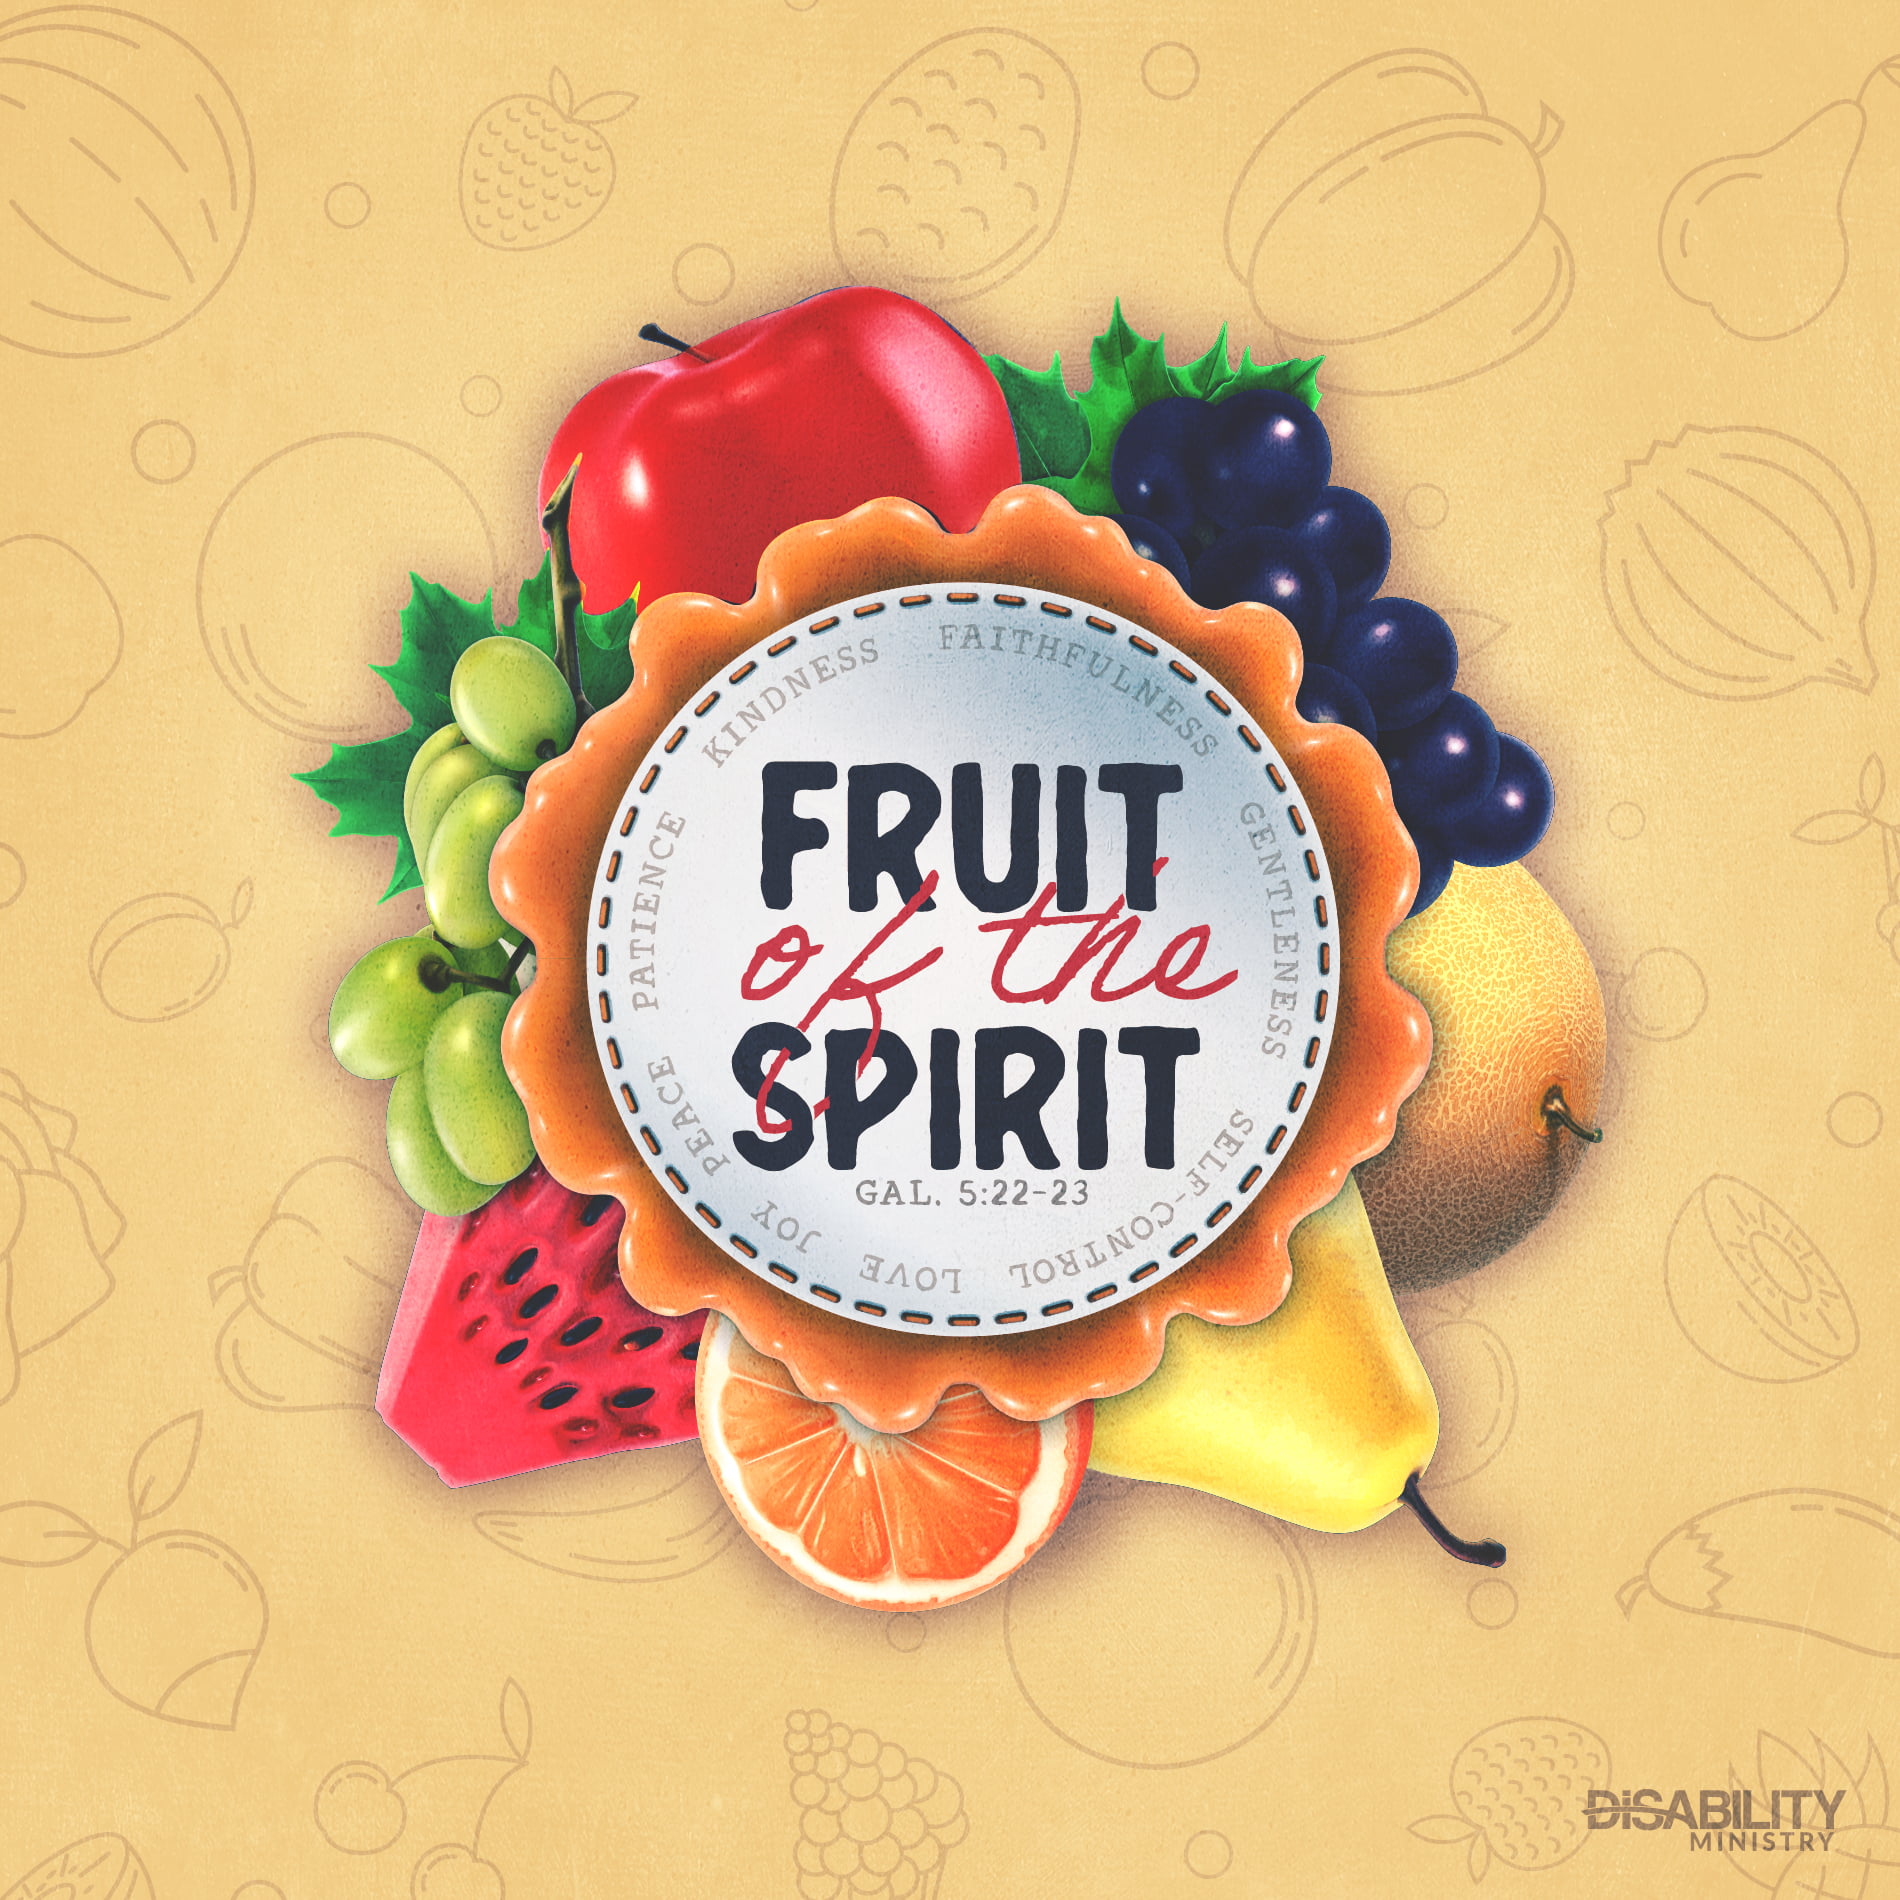 Fruit of the Spirit - Adult Disability Ministry Curriculum